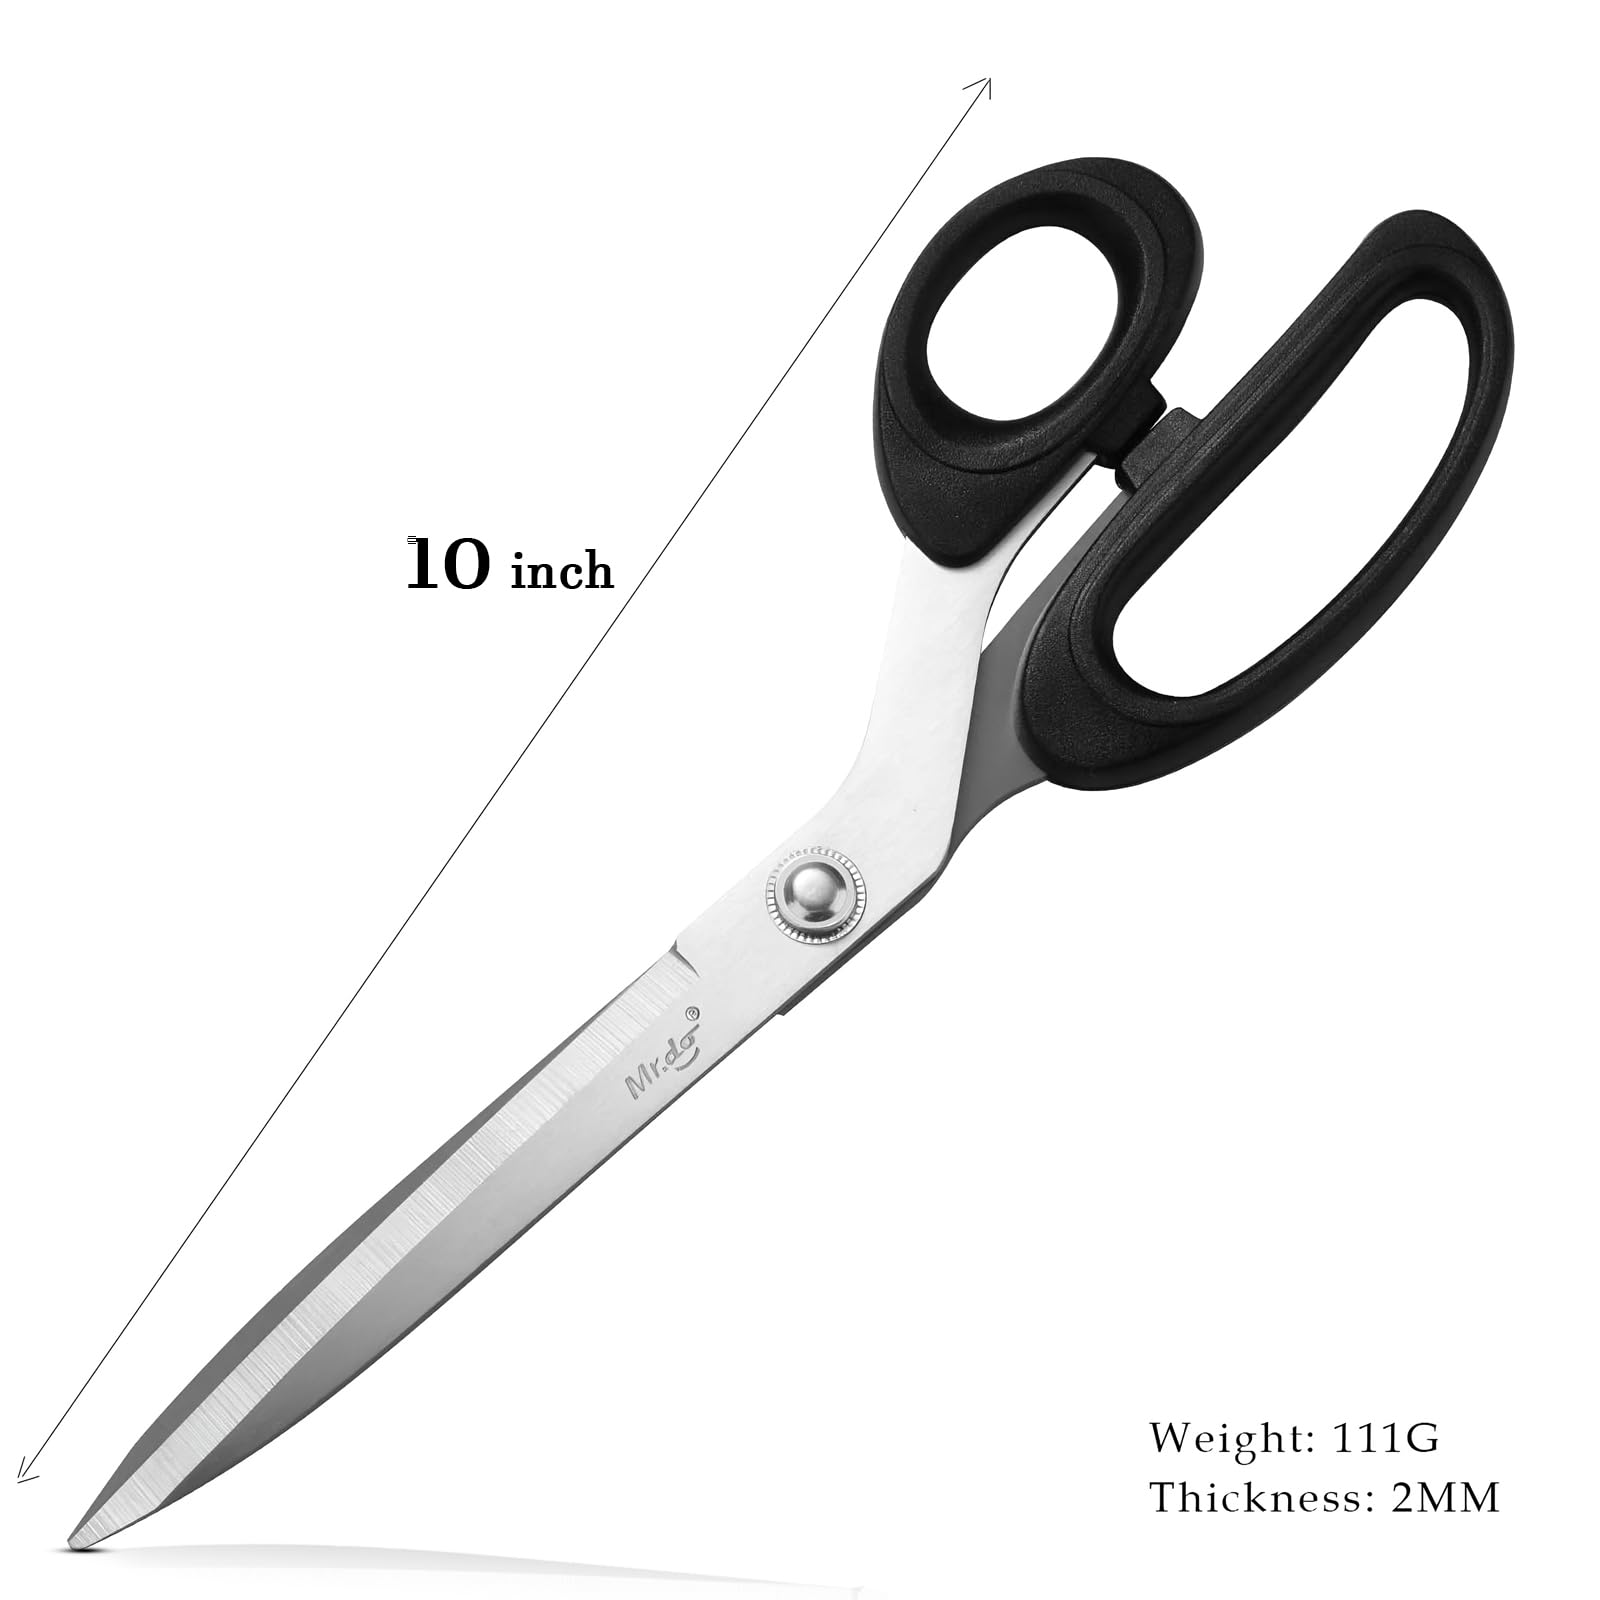 Mr.do Fabric Scissors 10 inch Sewing Scissors All Purpose Sharp Heavy Duty Fabric Scissors for Cutting Clothes Leather Classic Stainless Steel Professional Fabric Shears for Tailor Office Home